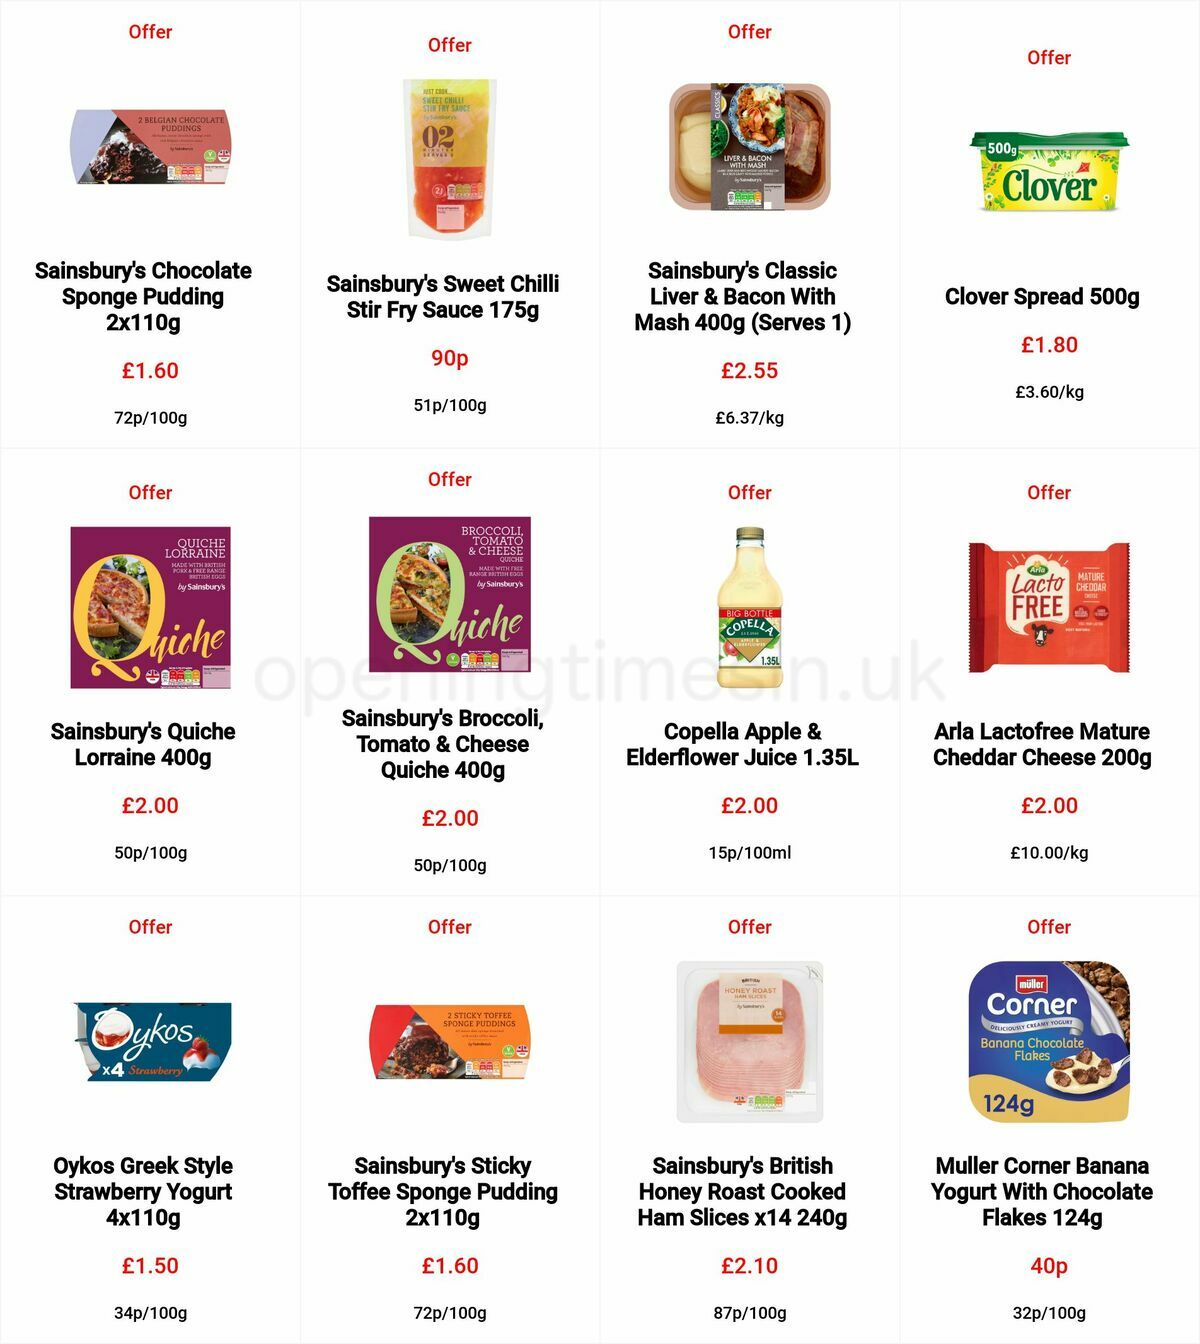 Sainsbury's Offers from 1 July